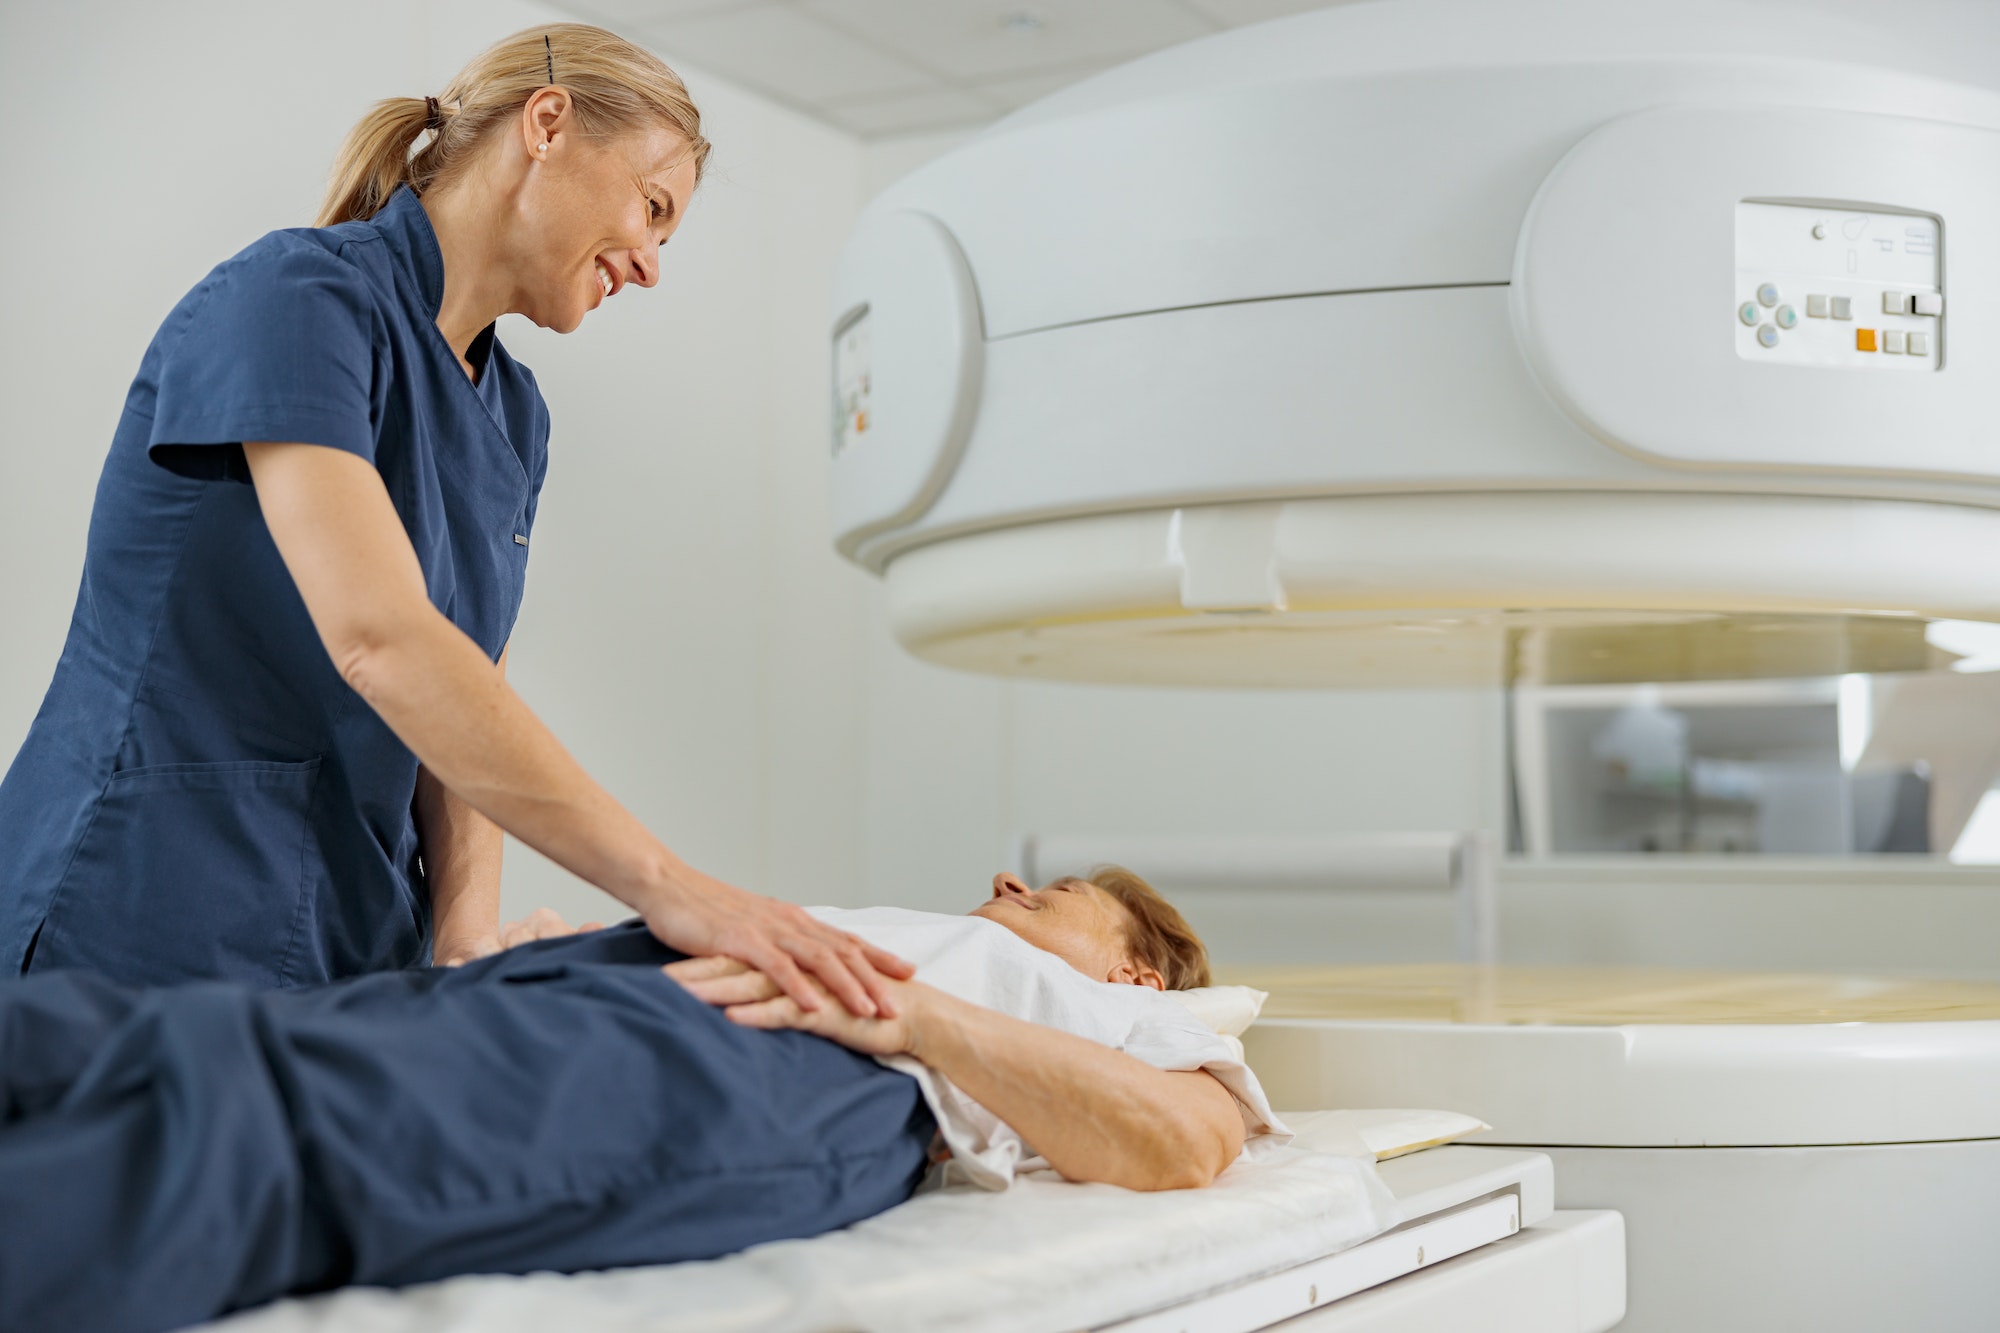 Radiologist controls MRI or CT or PET Scan with female patient undergoing procedure